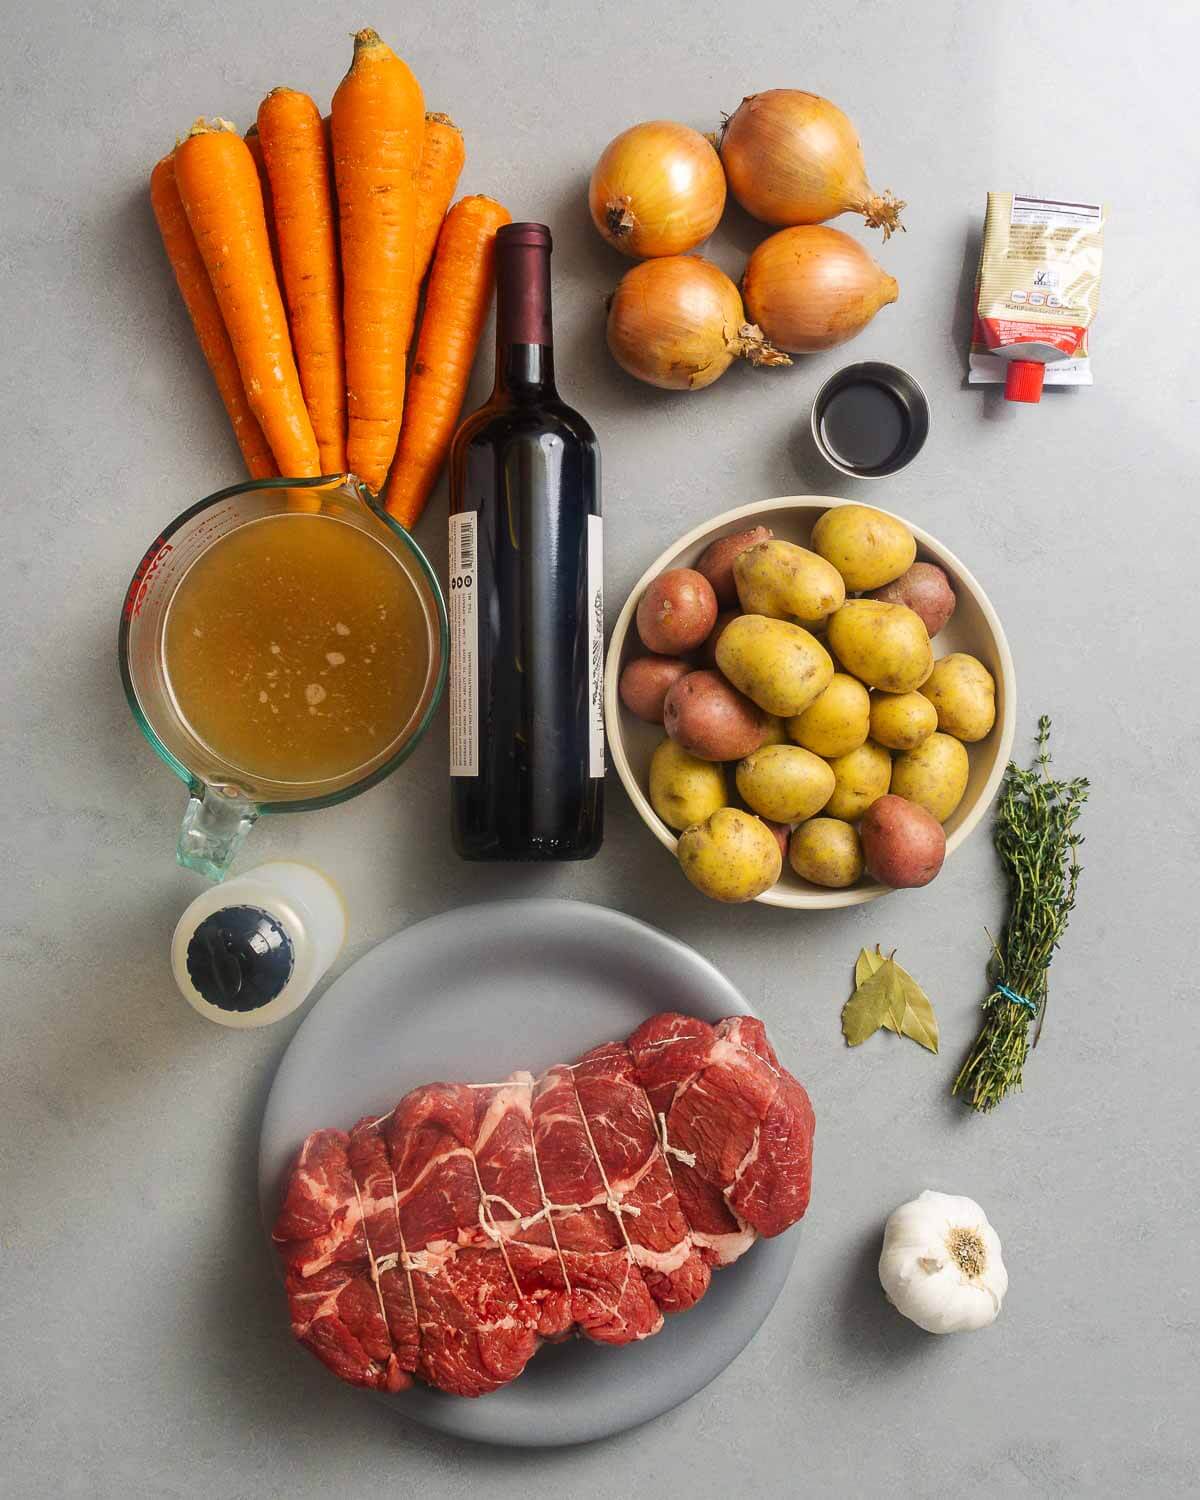 Ingredients shown: carrots, onions, red wine, worcestershire sauce, tomato paste, beef stock, potatoes, olive oil, thyme, bay leaves, chuck roast, and garlic.